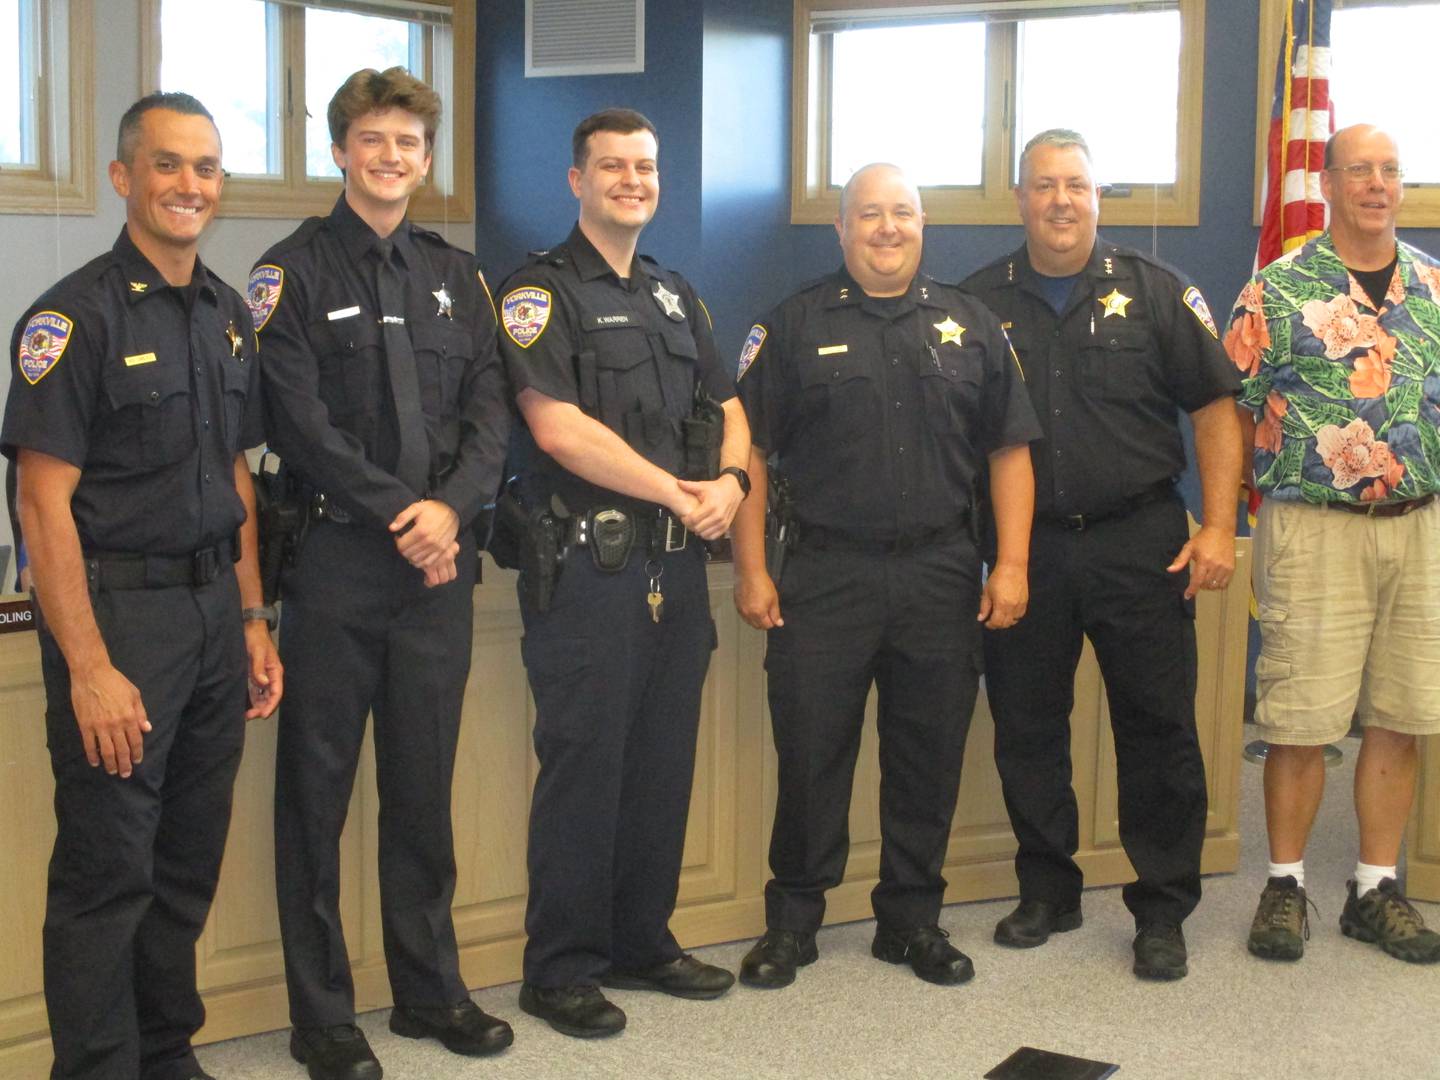 Yorkville welcomed to two police officers at the Aug. 9, 2022 Yorkville City Council meeting. From left is Commander Garrett Carlyle, new officers Peyton Heiser and Kevin Warren, Deputy Chief Ray Mikolasek, Chief Jim Jensen and Mayor John Purcell. (Mark Foster -- mfoster@shawmedia.com)